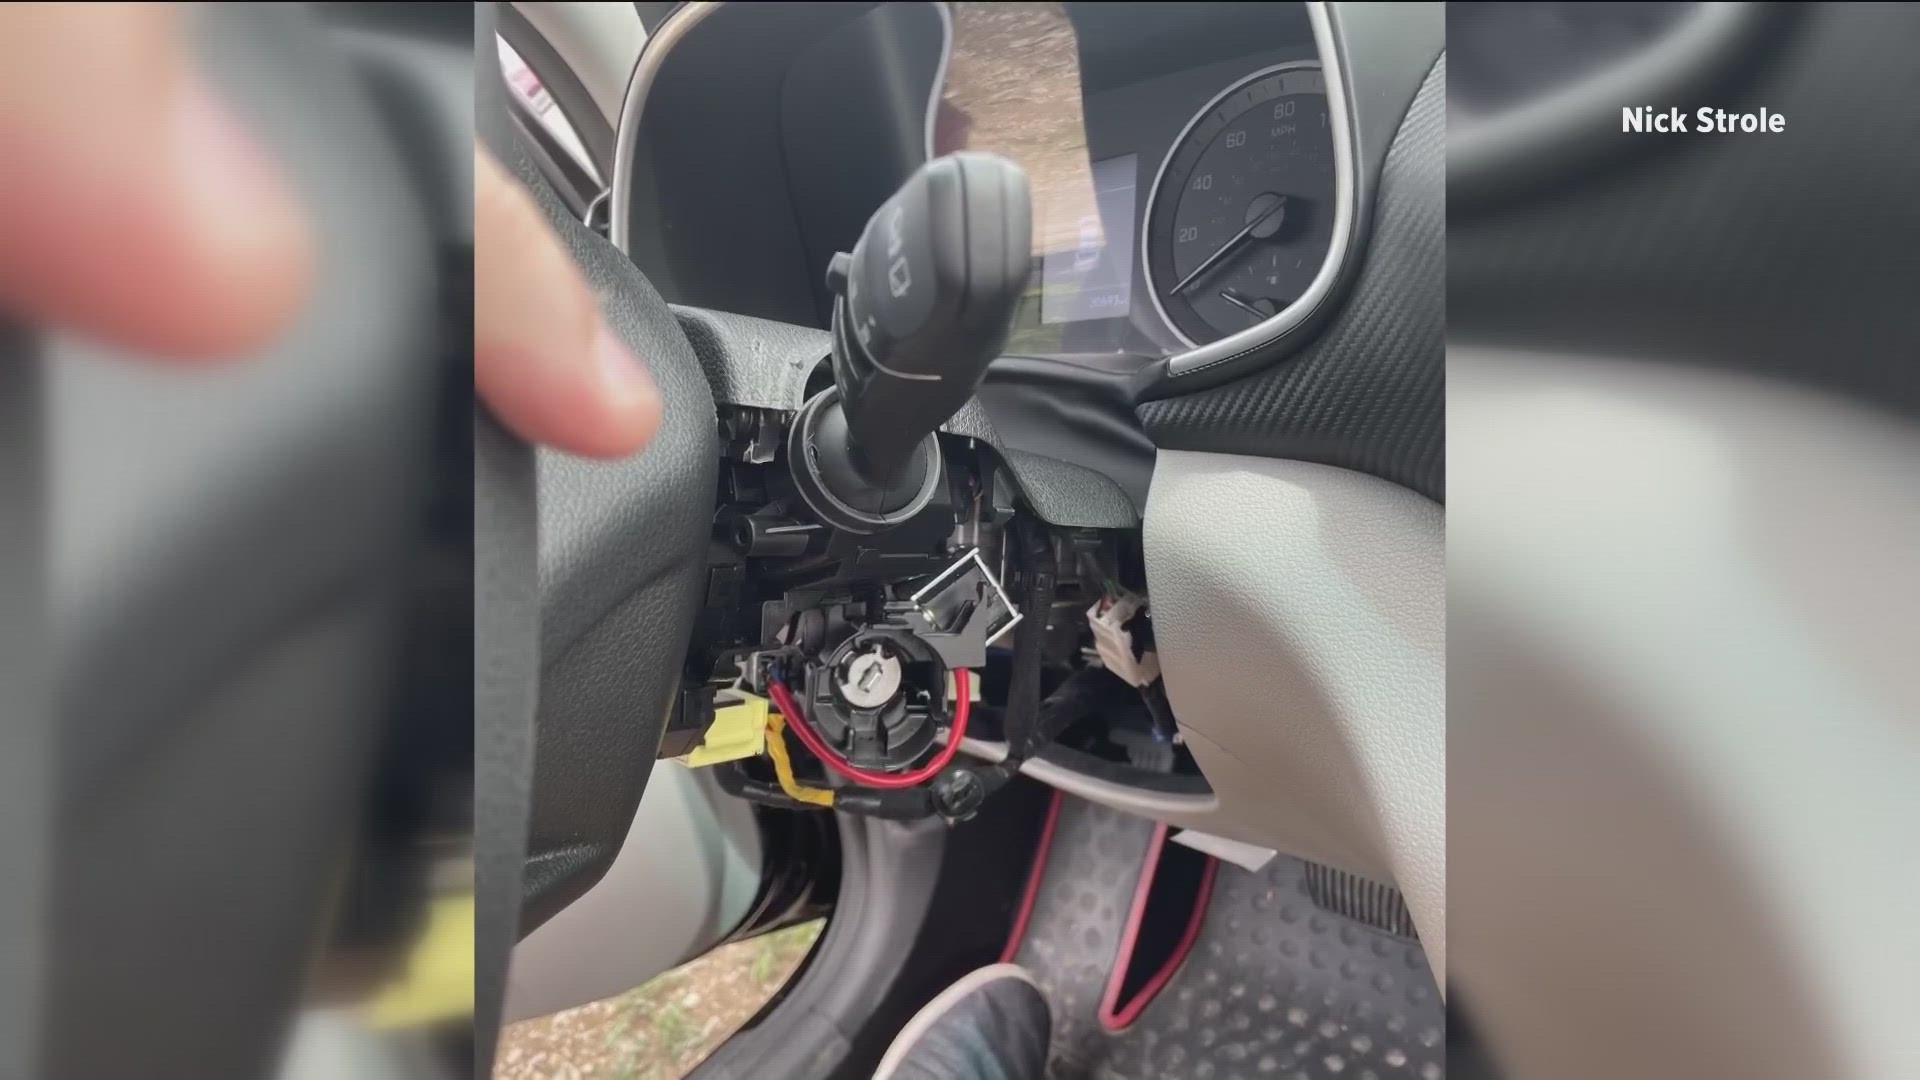 The "Kia Challenge" is a relatively new and illegal trend circulating on social media. It involves thieves targeting Kia and Hyundai vehicles and stealing them.